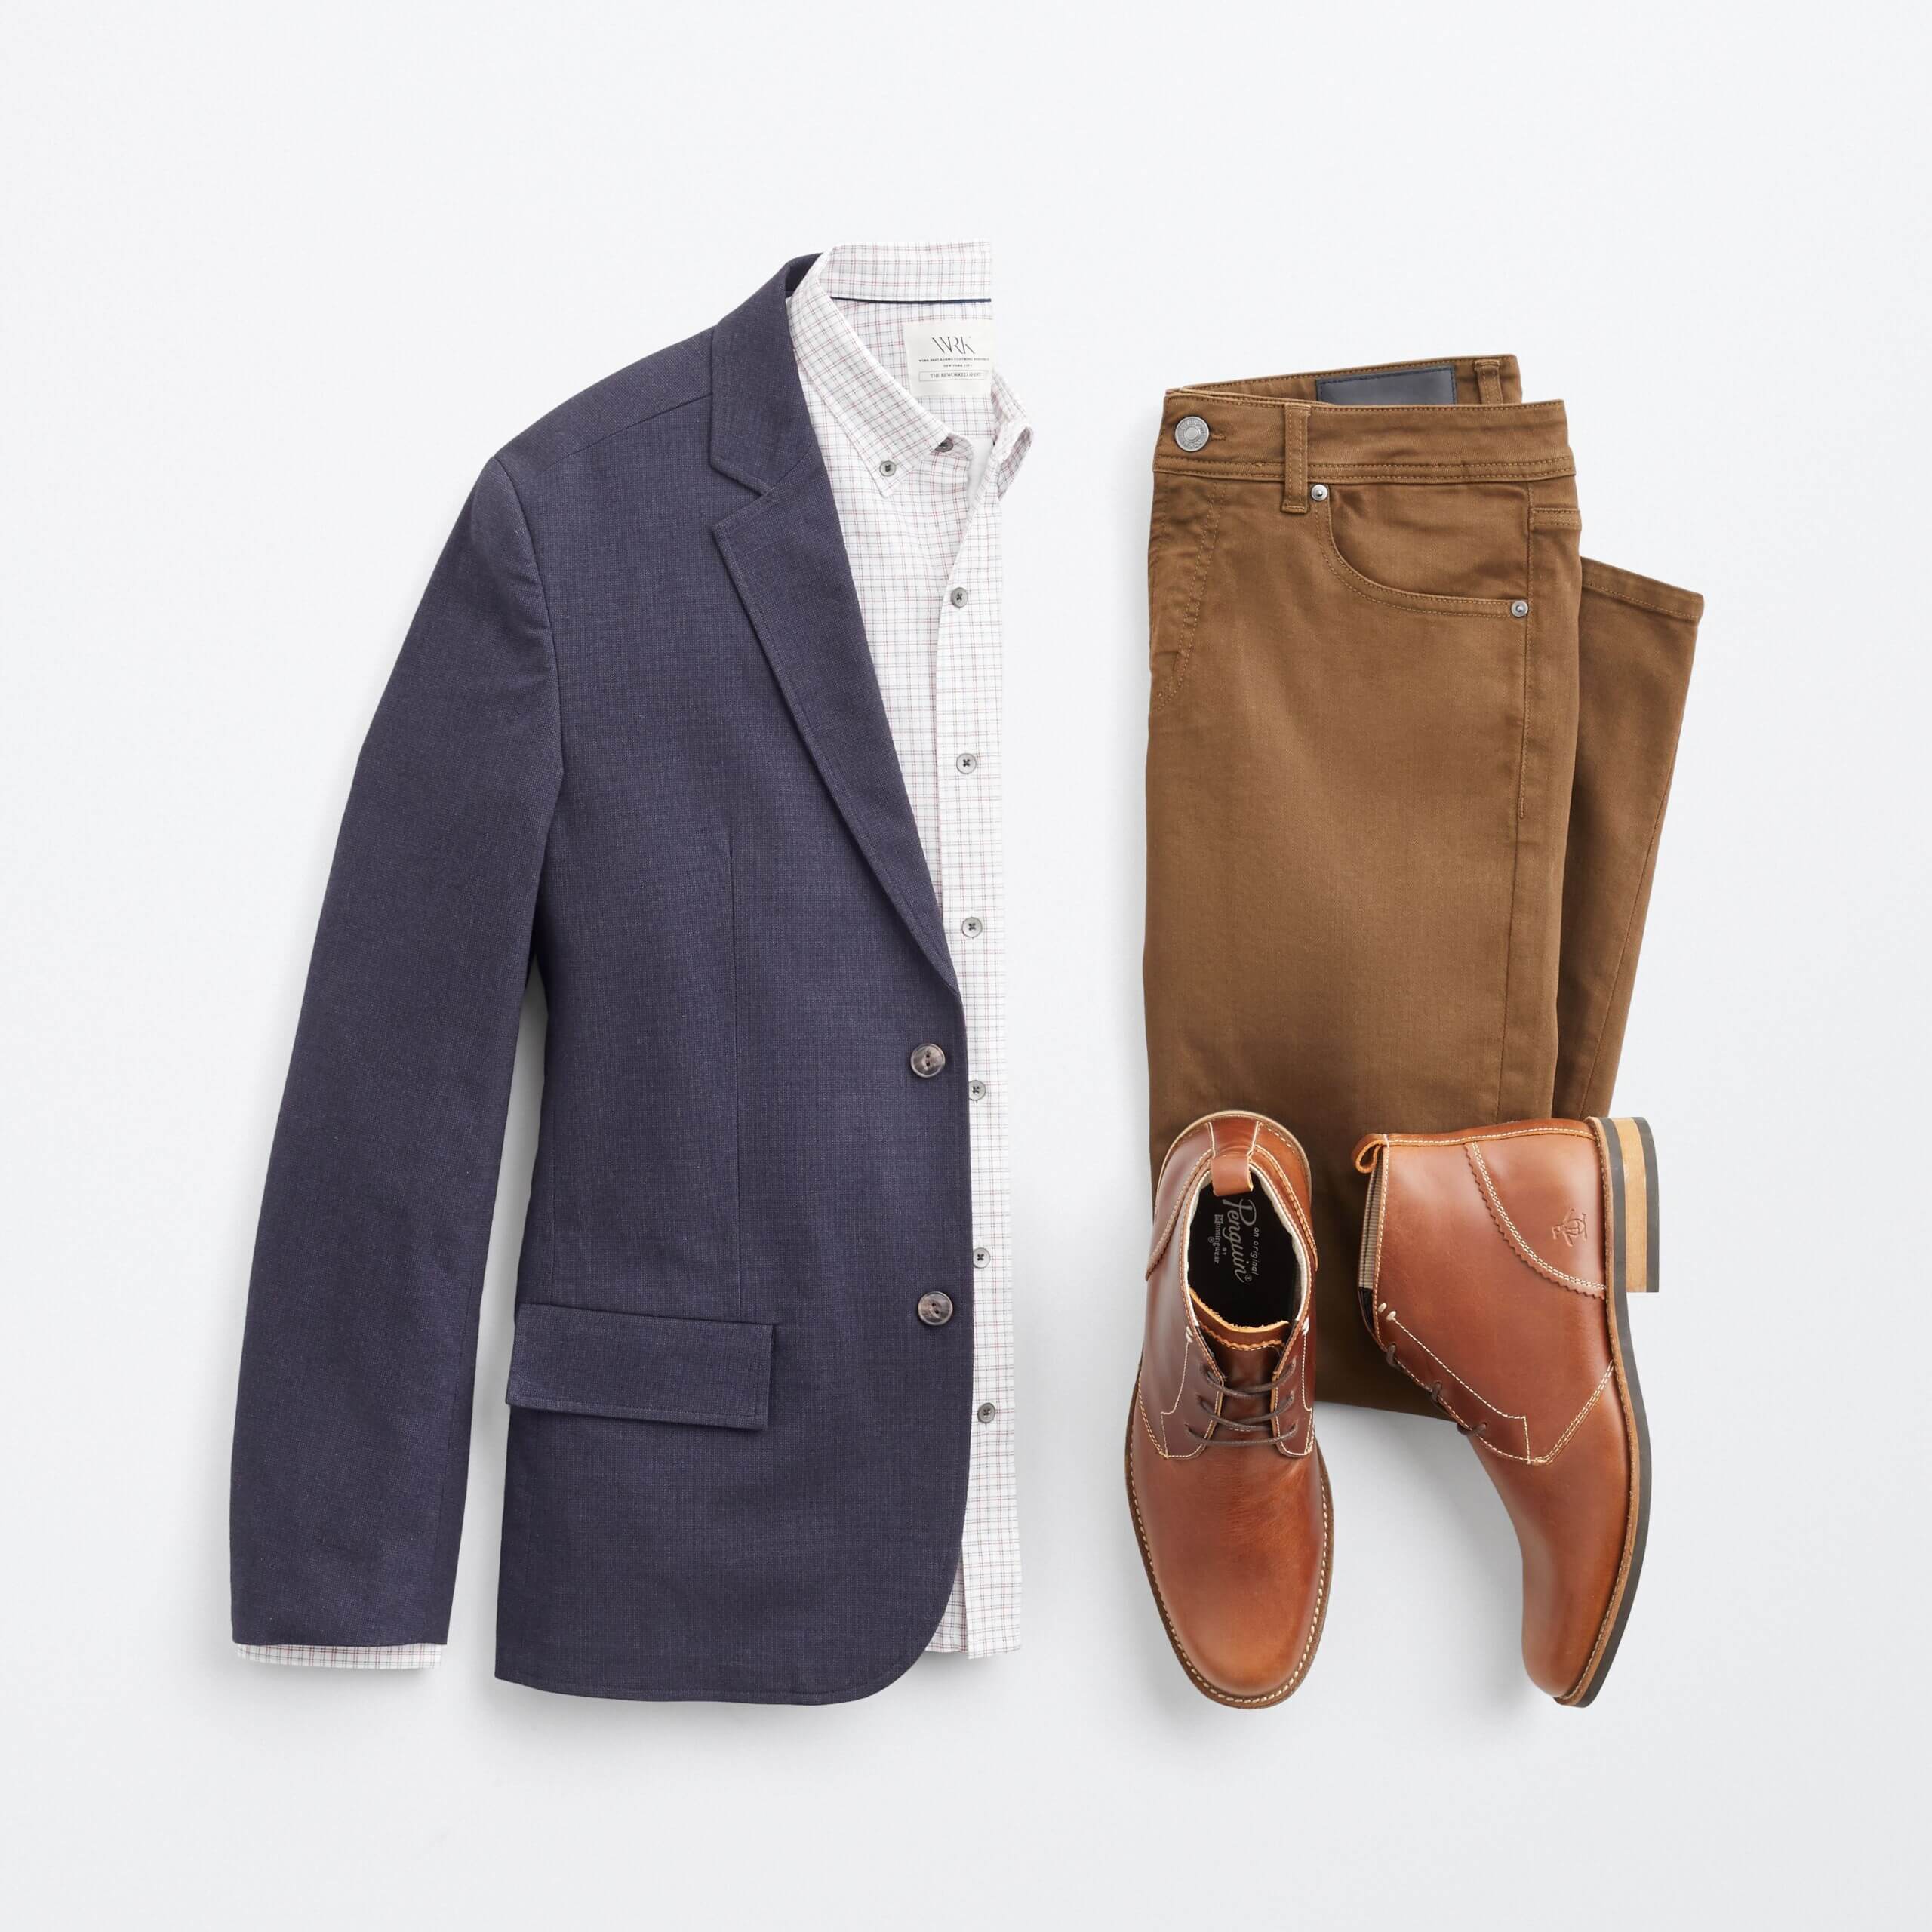 Stitch Fix Men's outfit: Navy blazer with white plaid shirt, brown jeans and cognac boots.